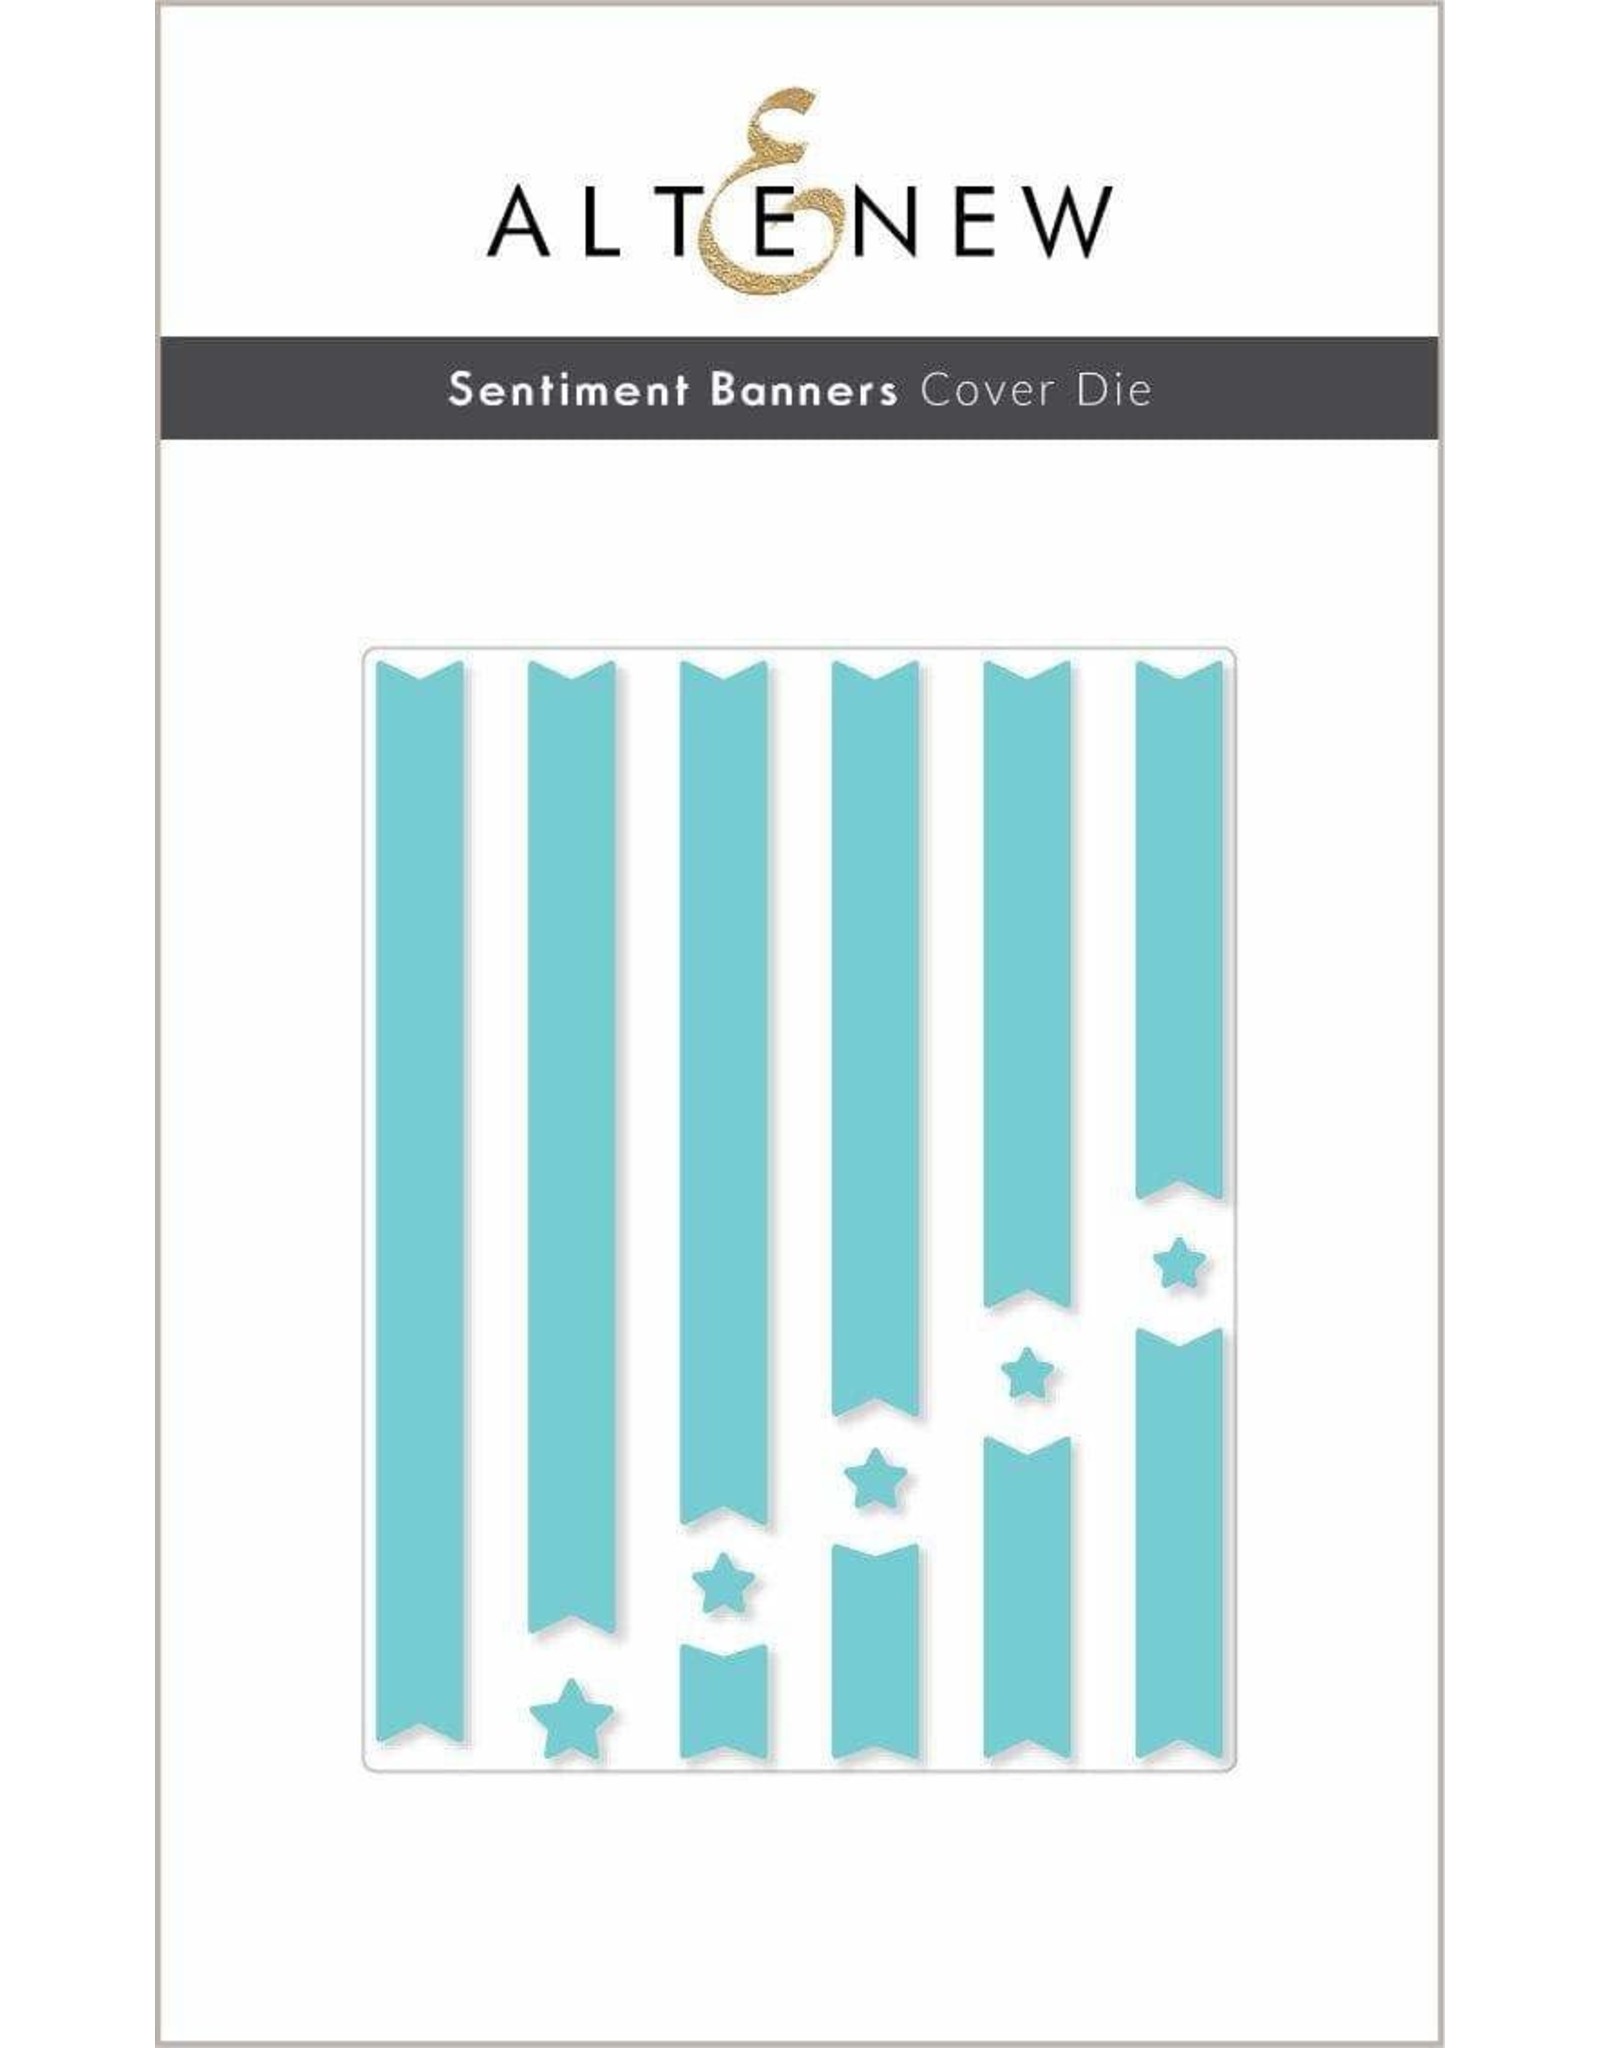 ALTENEW Sentiment Banners Cover Die